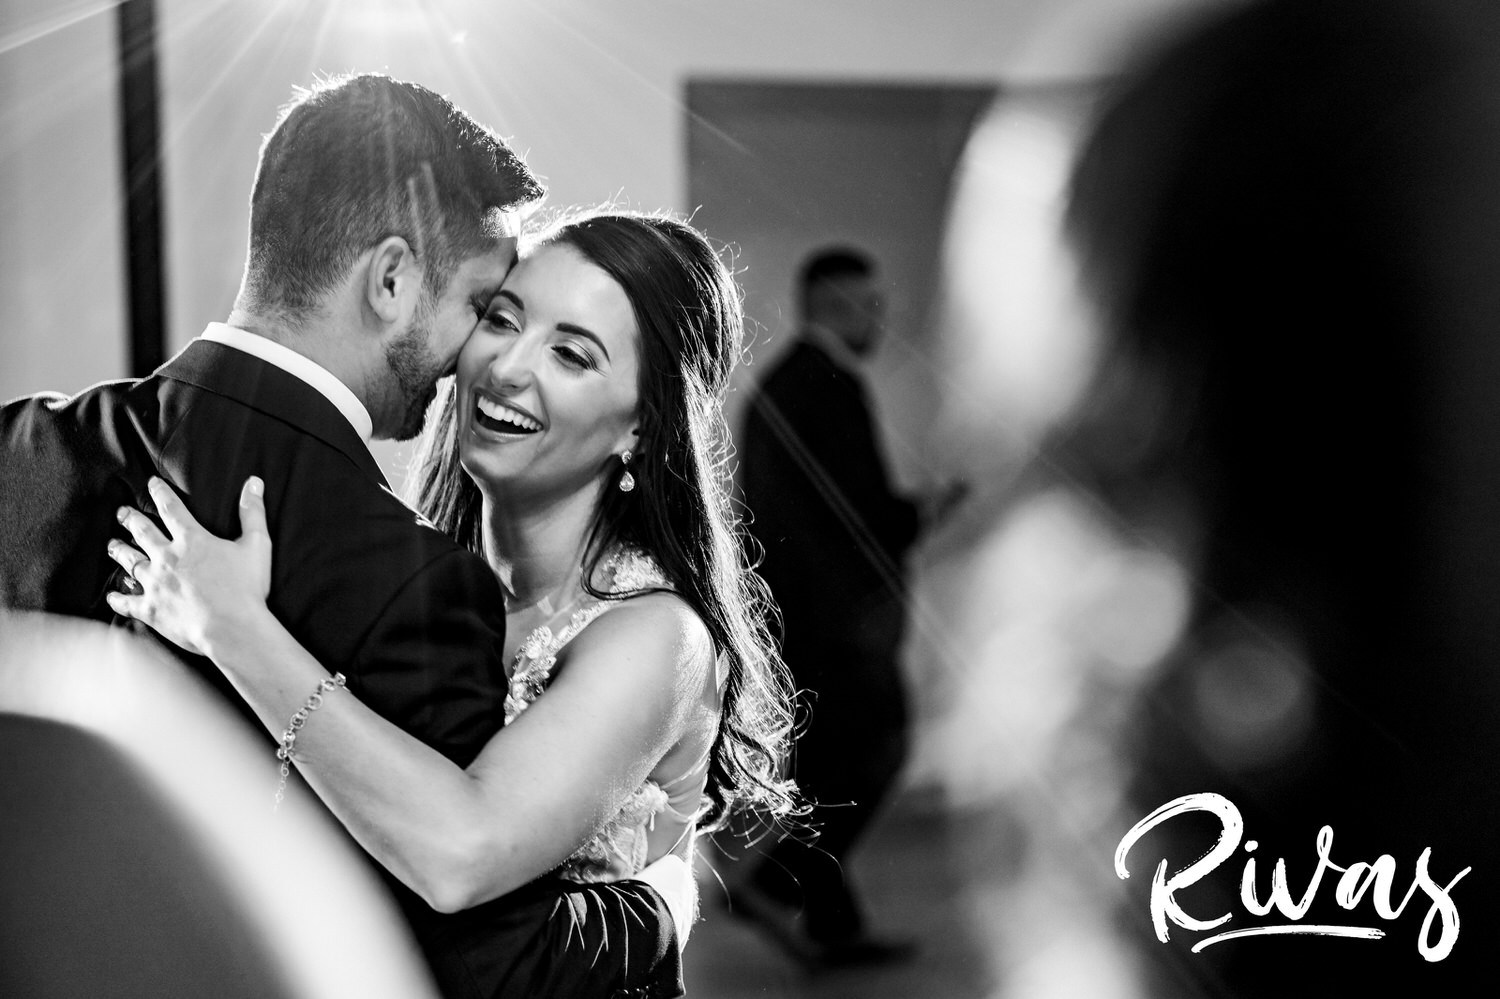 A candid black and white picture of a bride and groom sharing their first dance, as their wedding party stands watching during a wedding reception at The Gallery in downtown Kansas City. 